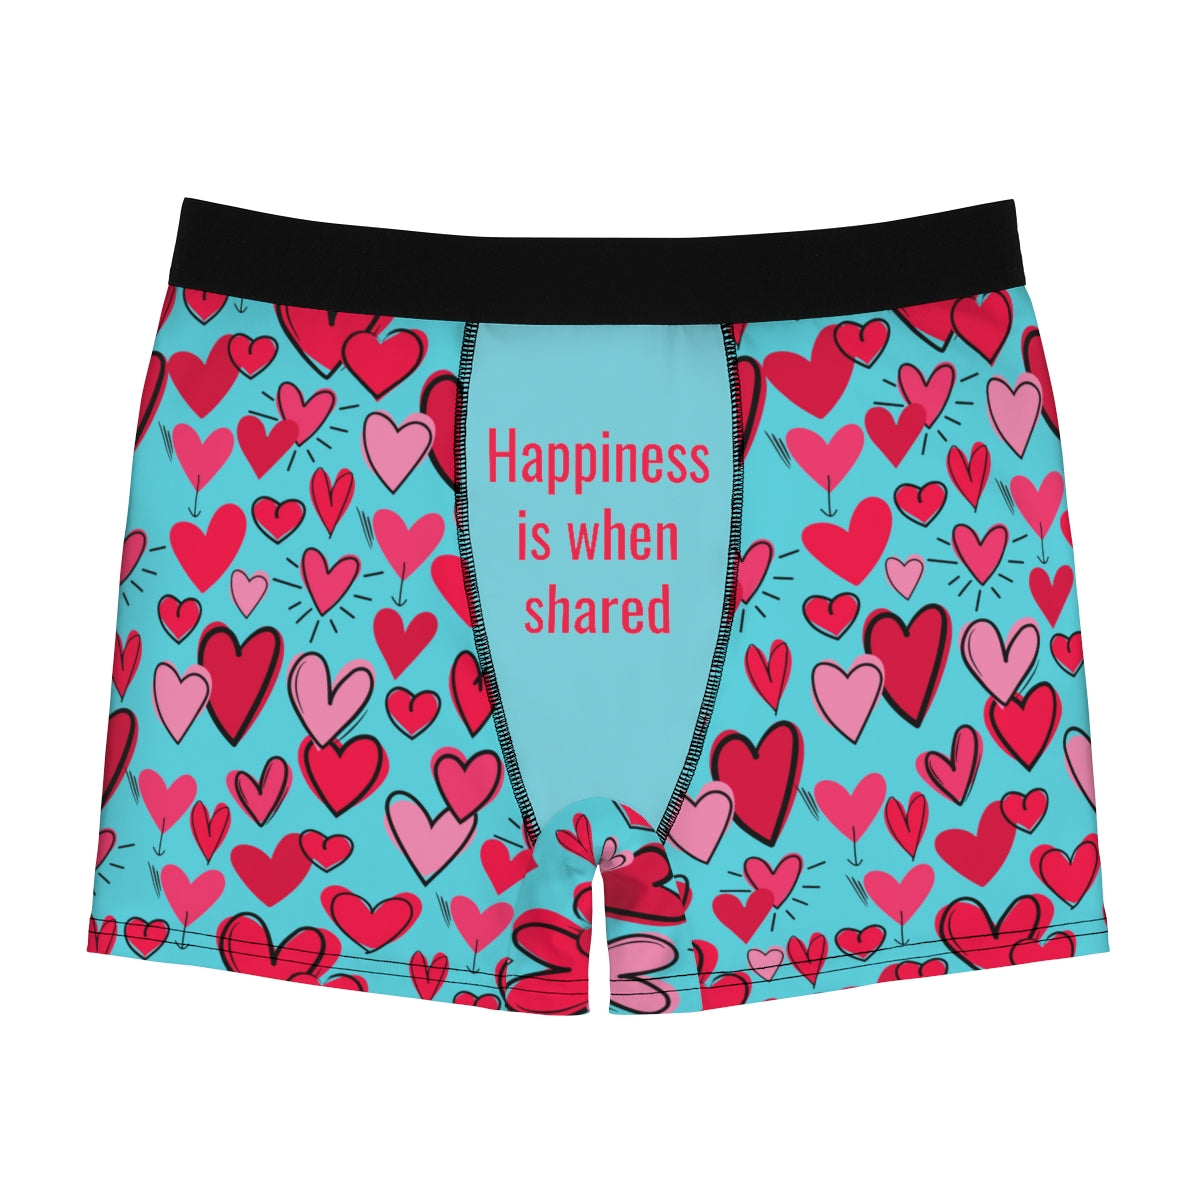 I love boxers so much, my favorites are PSD tho as u can see